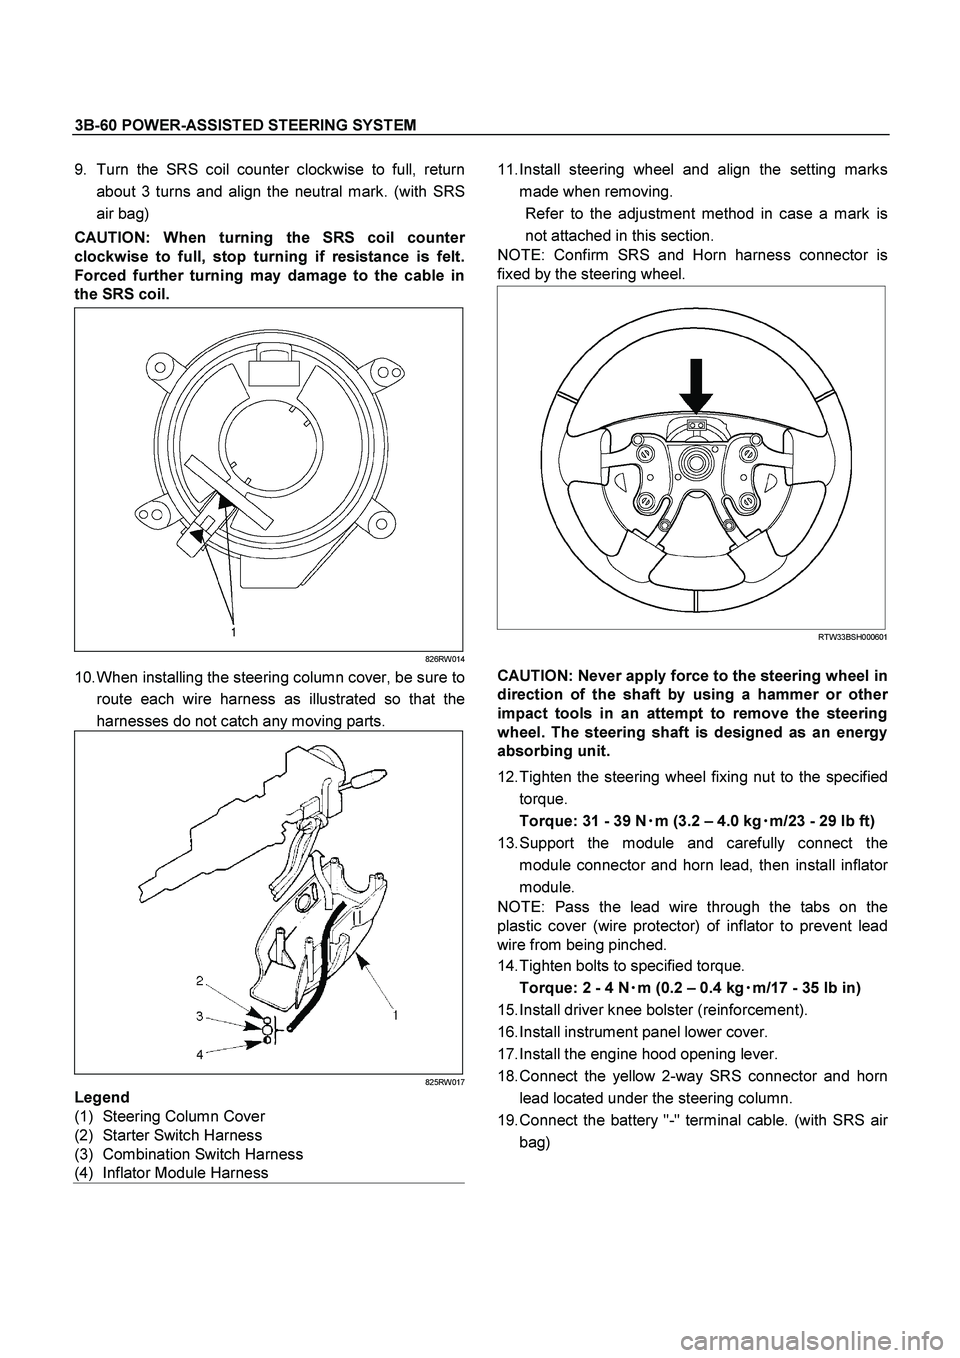 ISUZU TF SERIES 2004 Repair Manual 3B-60 POWER-ASSISTED STEERING SYSTEM
 
9.  Turn the SRS coil counter clockwise to full, return
about 3 turns and align the neutral mark. (with SRS
air bag) 
CAUTION: When turning the SRS coil counte
r